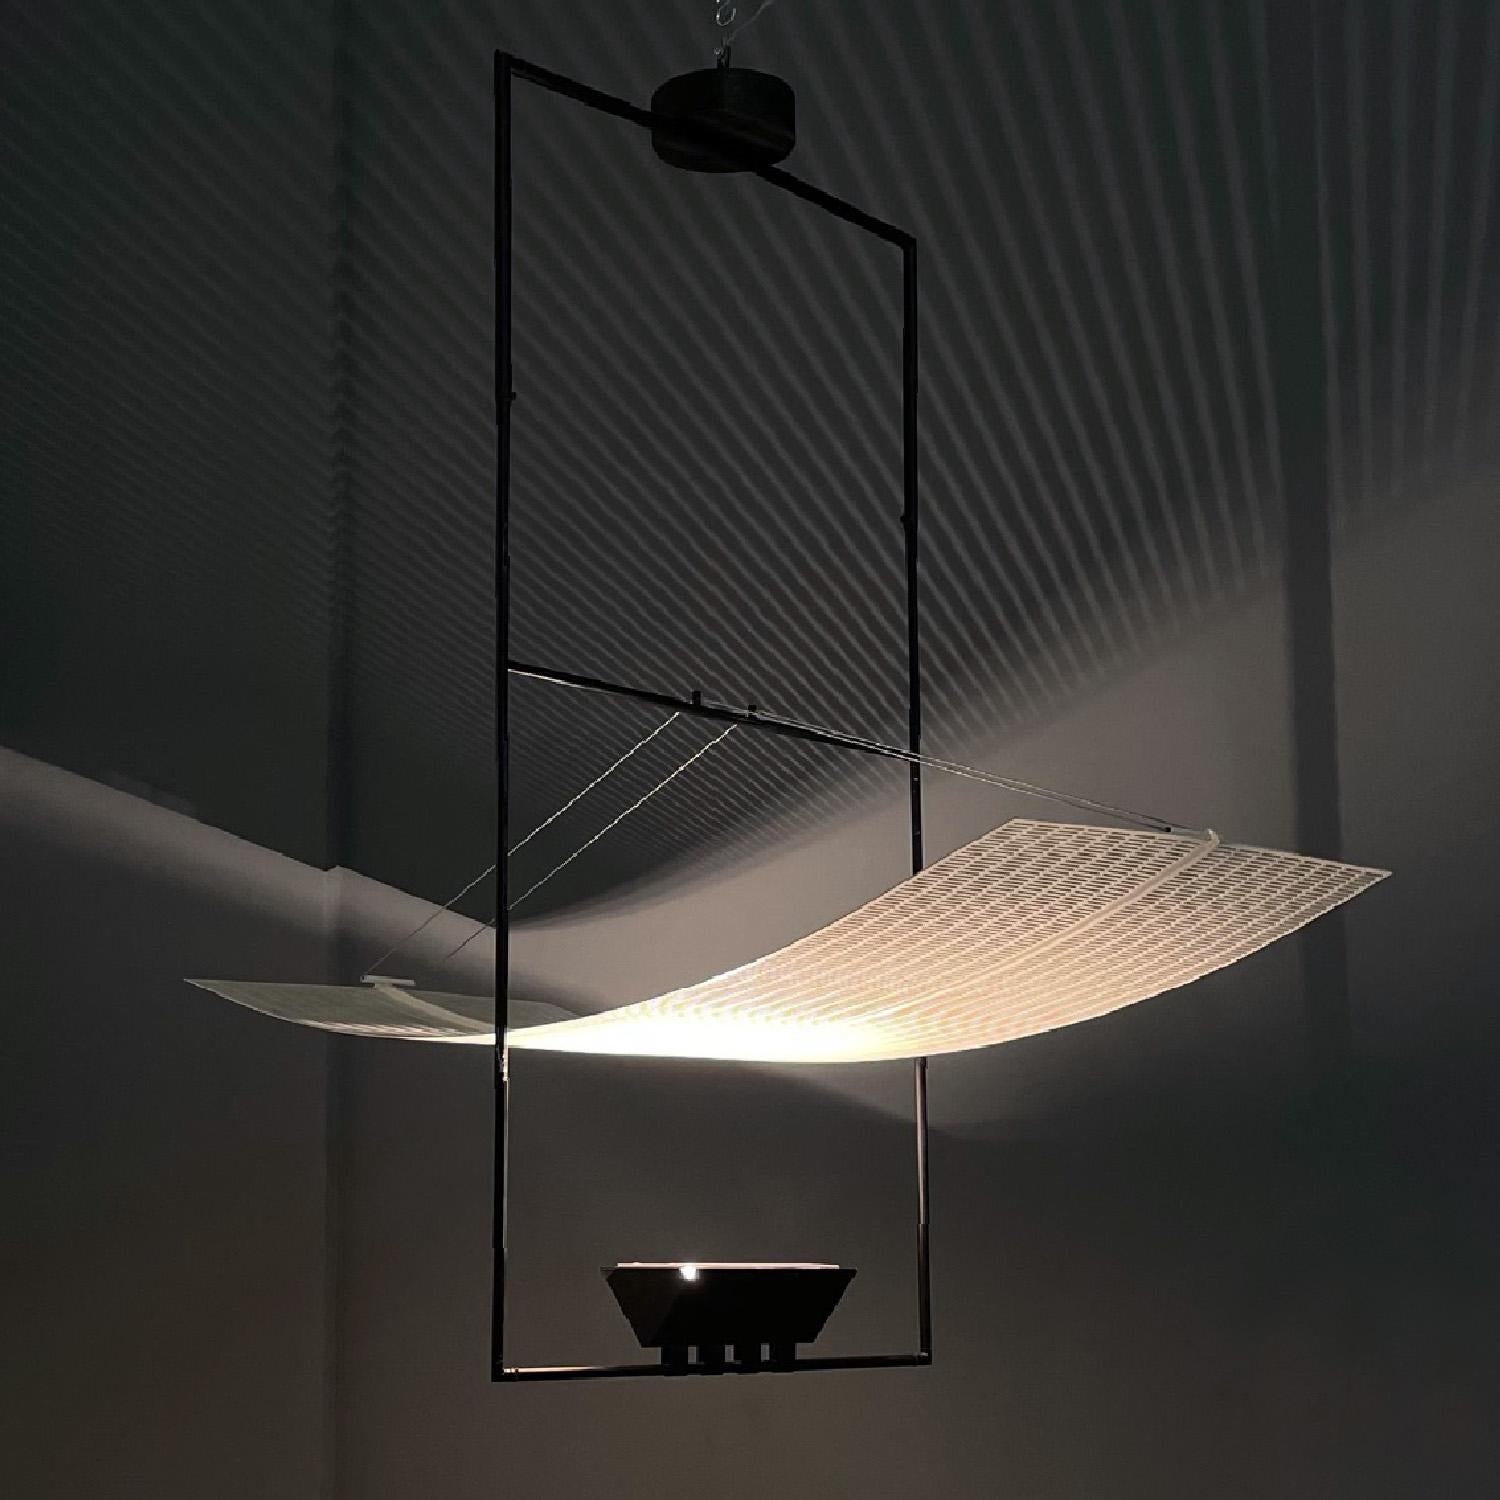 Italian modern White black metal Chandelier Zefiro by Mario Botta for Artemide, 1990s
Chandelier mod. Zefiro with black metal rod structure in the center of which a curved perforated and white enamelled metal sheet is suspended by wires. Below this